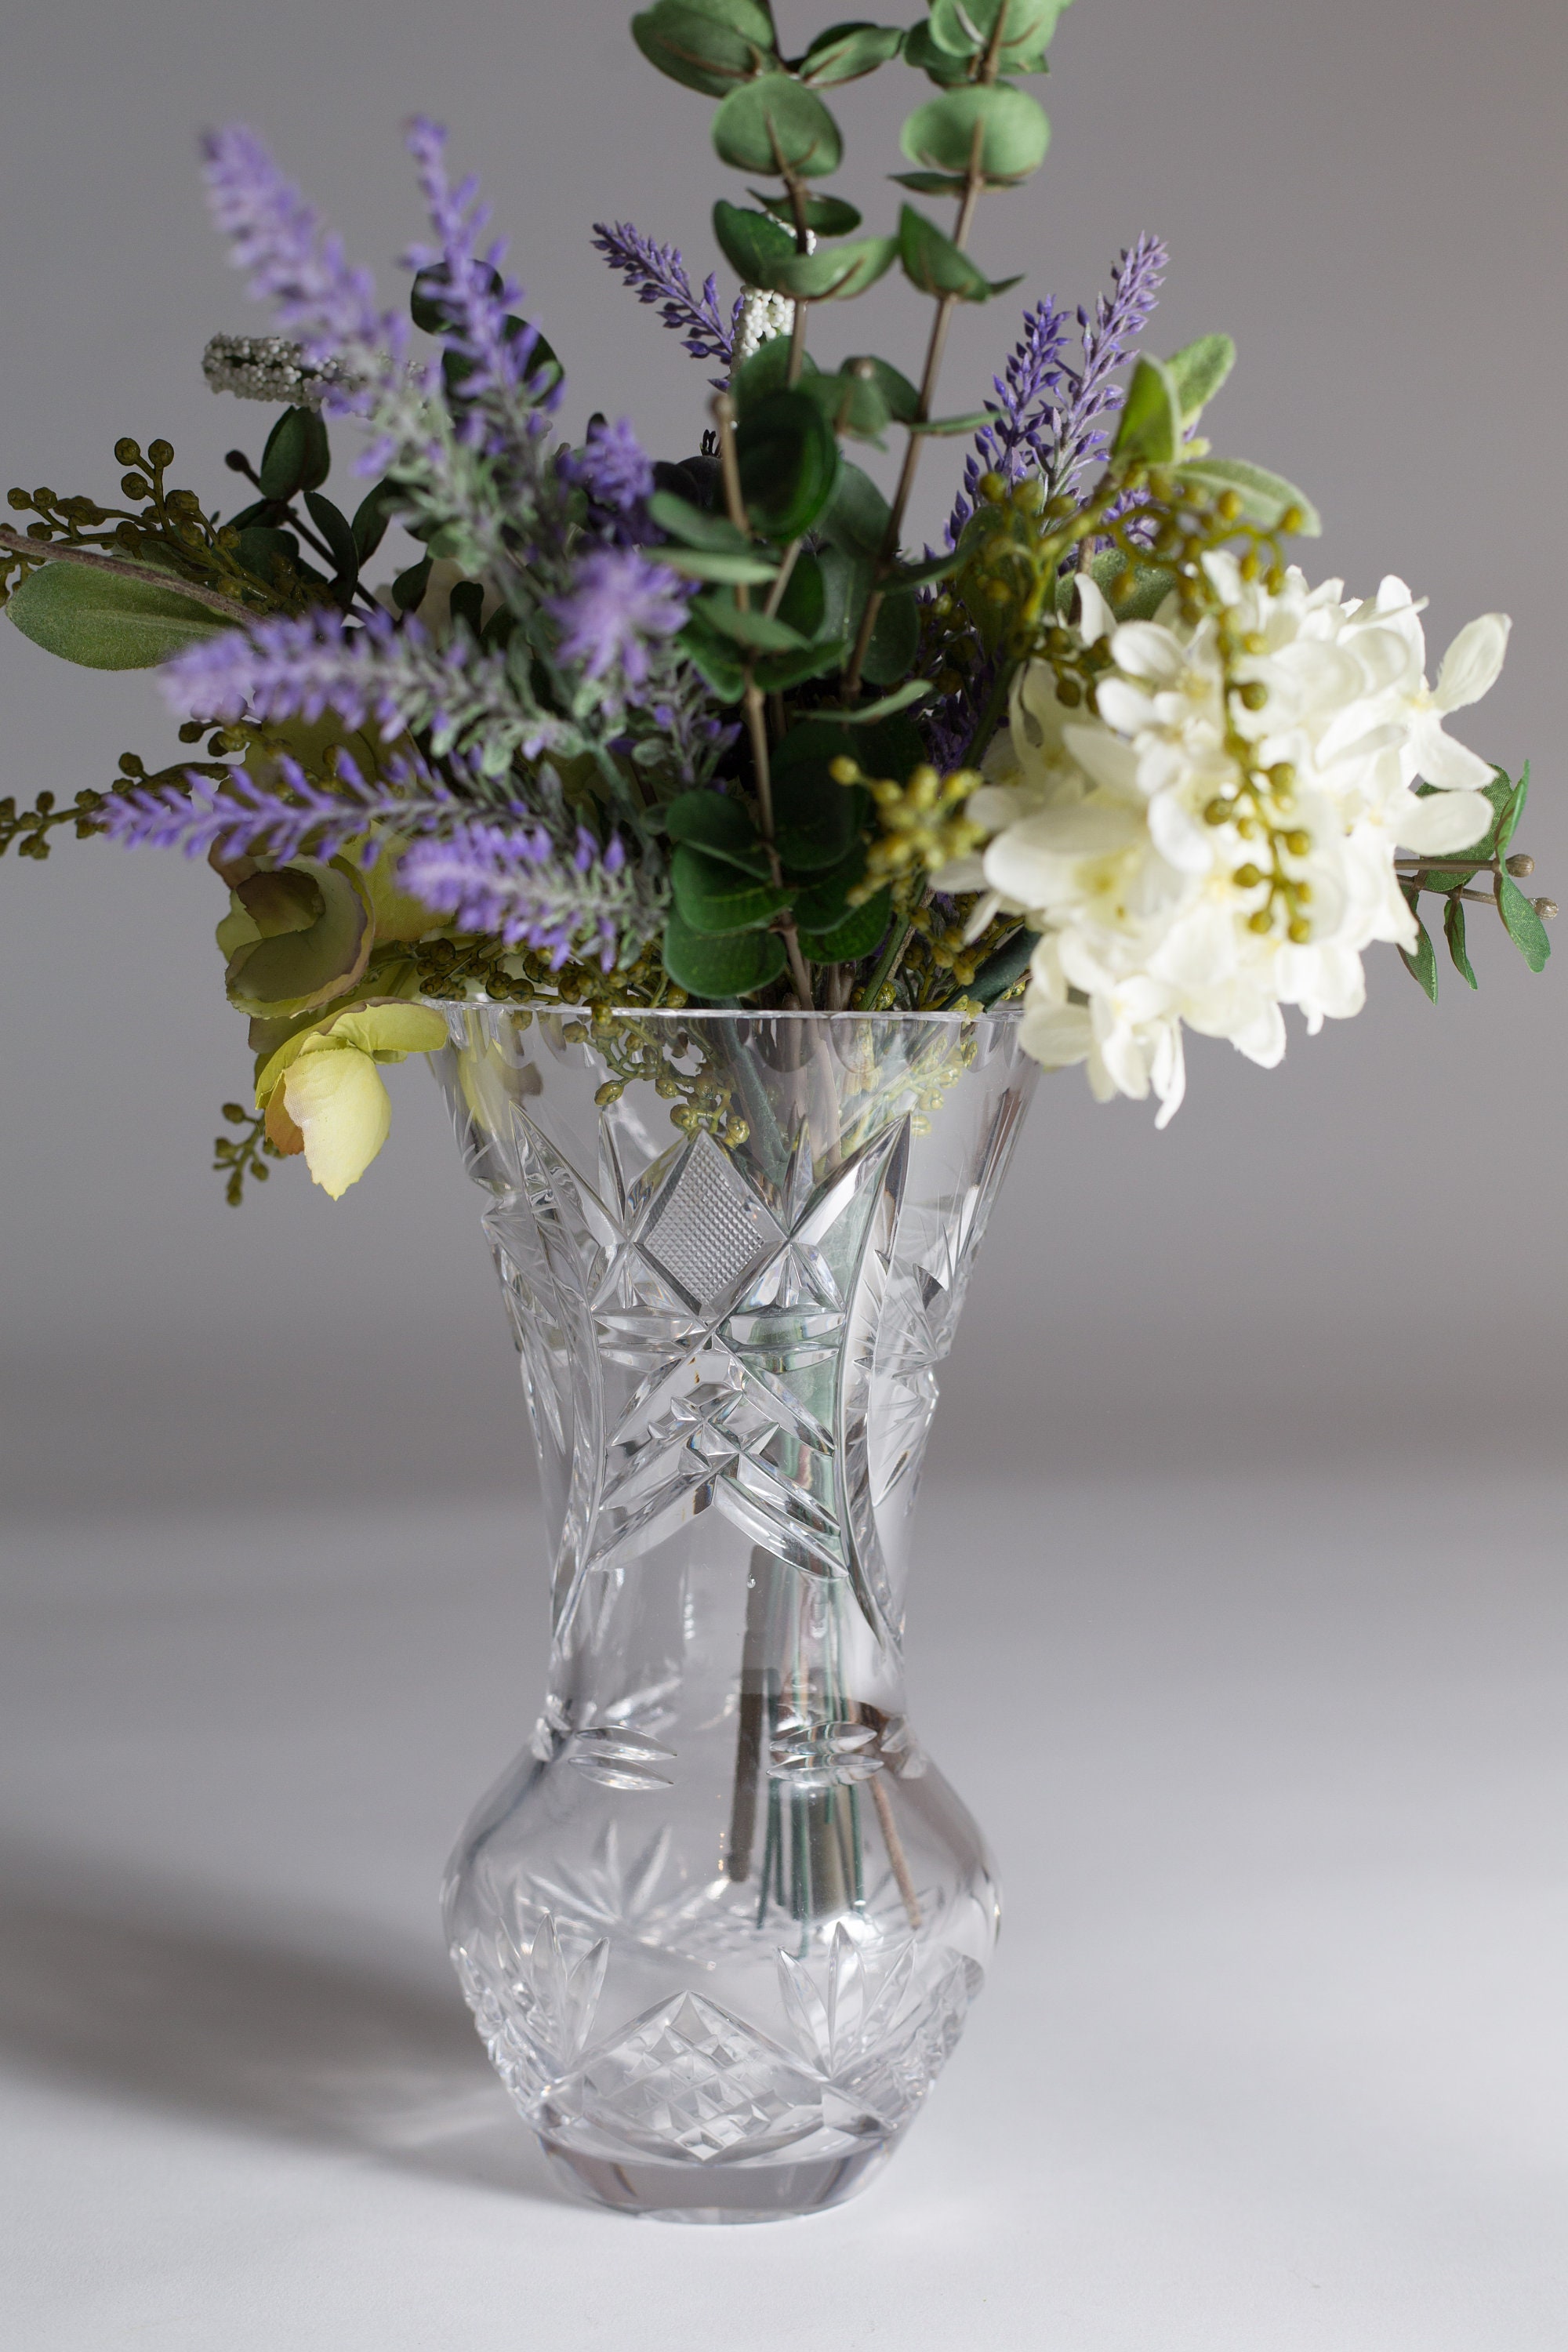 Rectangle Glass Vase With Flowers : Hydrangea Centerpiece In Glass Vase ...